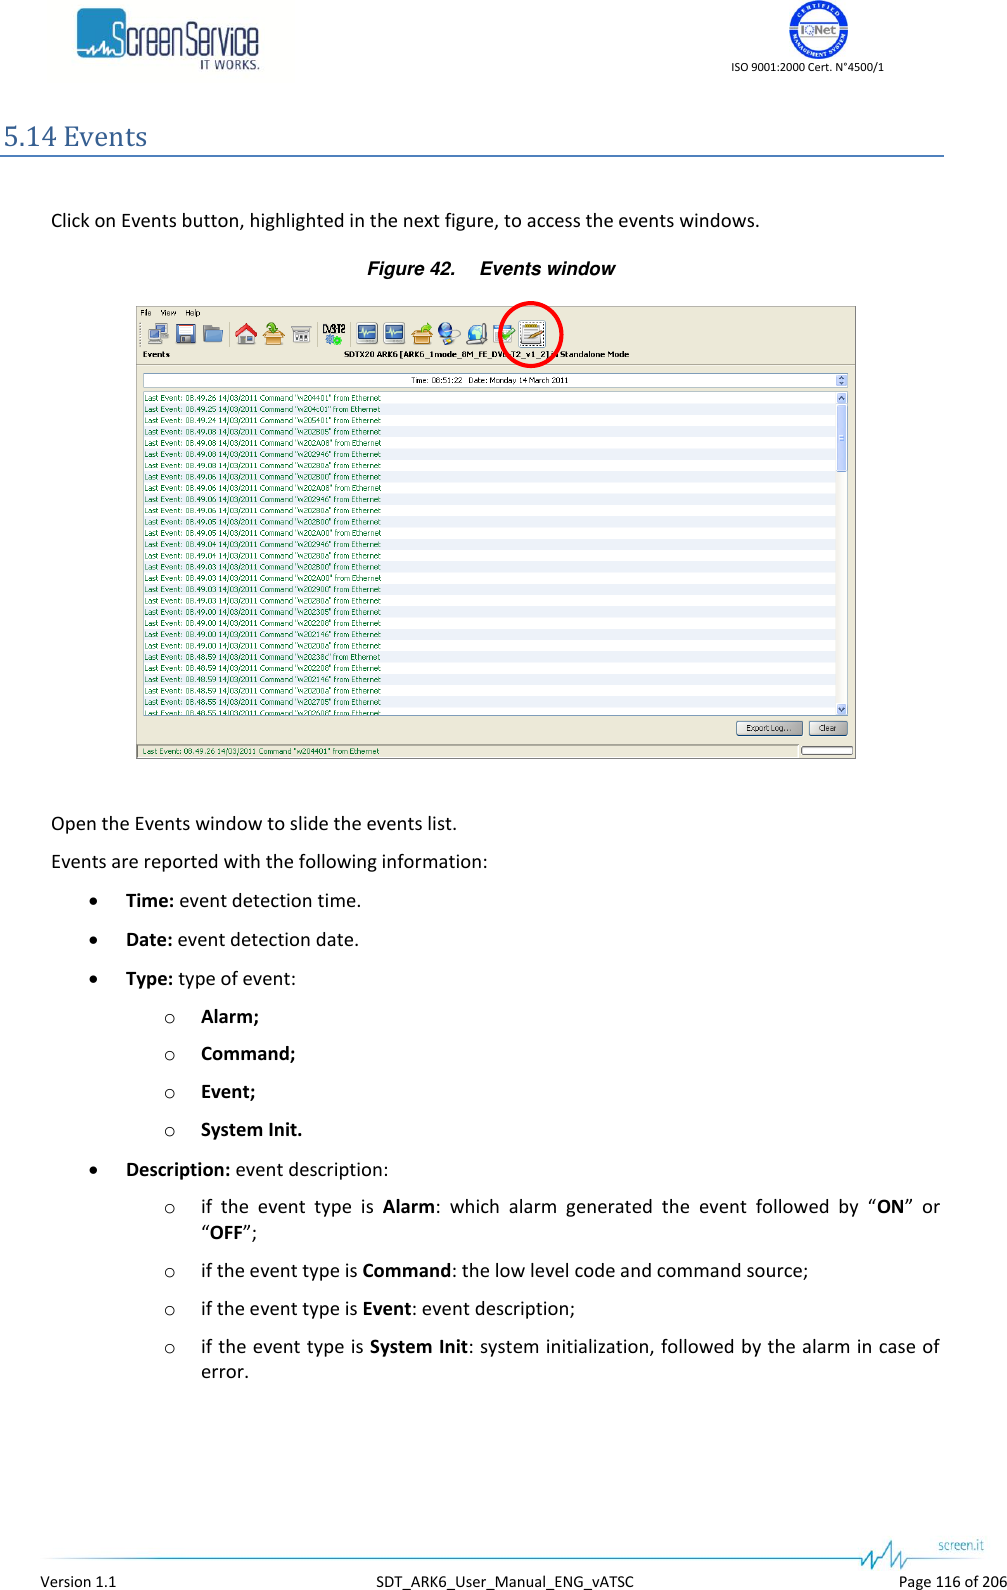    ISO 9001:2000 Cert. N°4500/1   Version 1.1  SDT_ARK6_User_Manual_ENG_vATSC  Page 116 of 206 5.14 Events  Click on Events button, highlighted in the next figure, to access the events windows. Figure 42. Events window   Open the Events window to slide the events list. Events are reported with the following information:  Time: event detection time.  Date: event detection date.  Type: type of event: o Alarm; o Command; o Event; o System Init.  Description: event description: o if  the  event  type  is  Alarm:  which  alarm  generated  the  event  followed  by  “ON”  or “OFF”; o if the event type is Command: the low level code and command source; o if the event type is Event: event description; o if the event type is System Init: system initialization, followed by the alarm in case of error.  